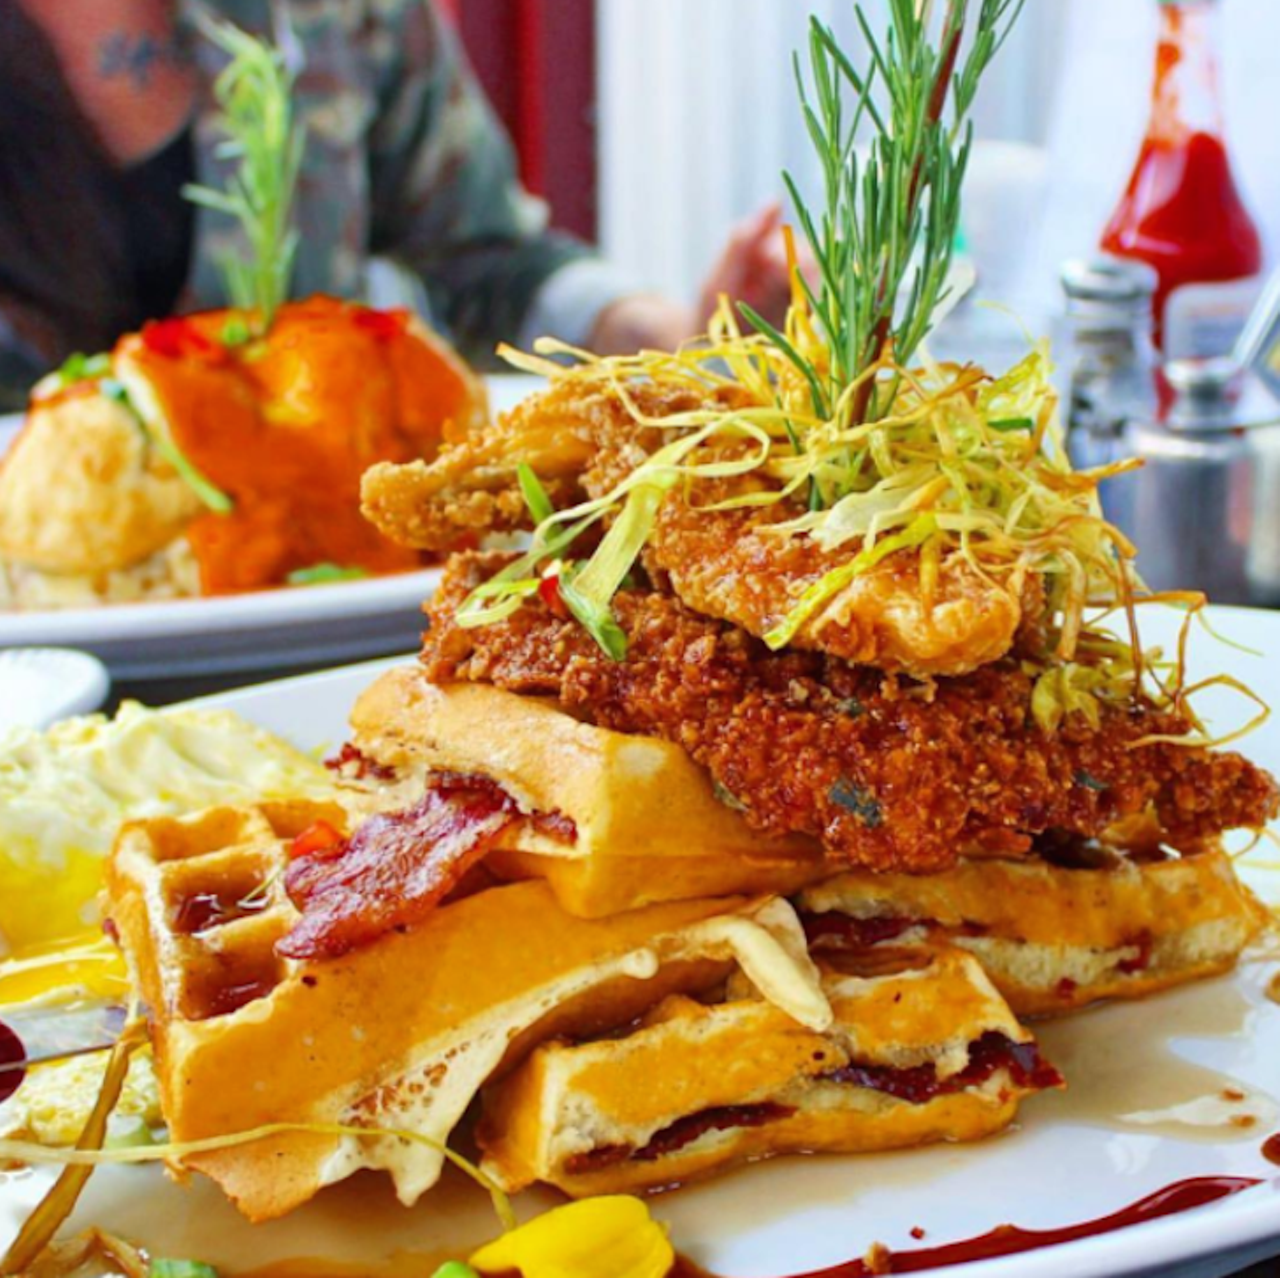 Hash House a go go
5350 International Drive | 407-370-4646
Hash House is known for gargantuan portions, so make sure you bring your appetite here. While they have plenty of &#147;twisted farm food,&#148; be sure to try their Man vs Food-challenge-worthy Andy&#146;s Sage Fried Chicken if you think you can handle it.
Photo via foodactivity/Instagram